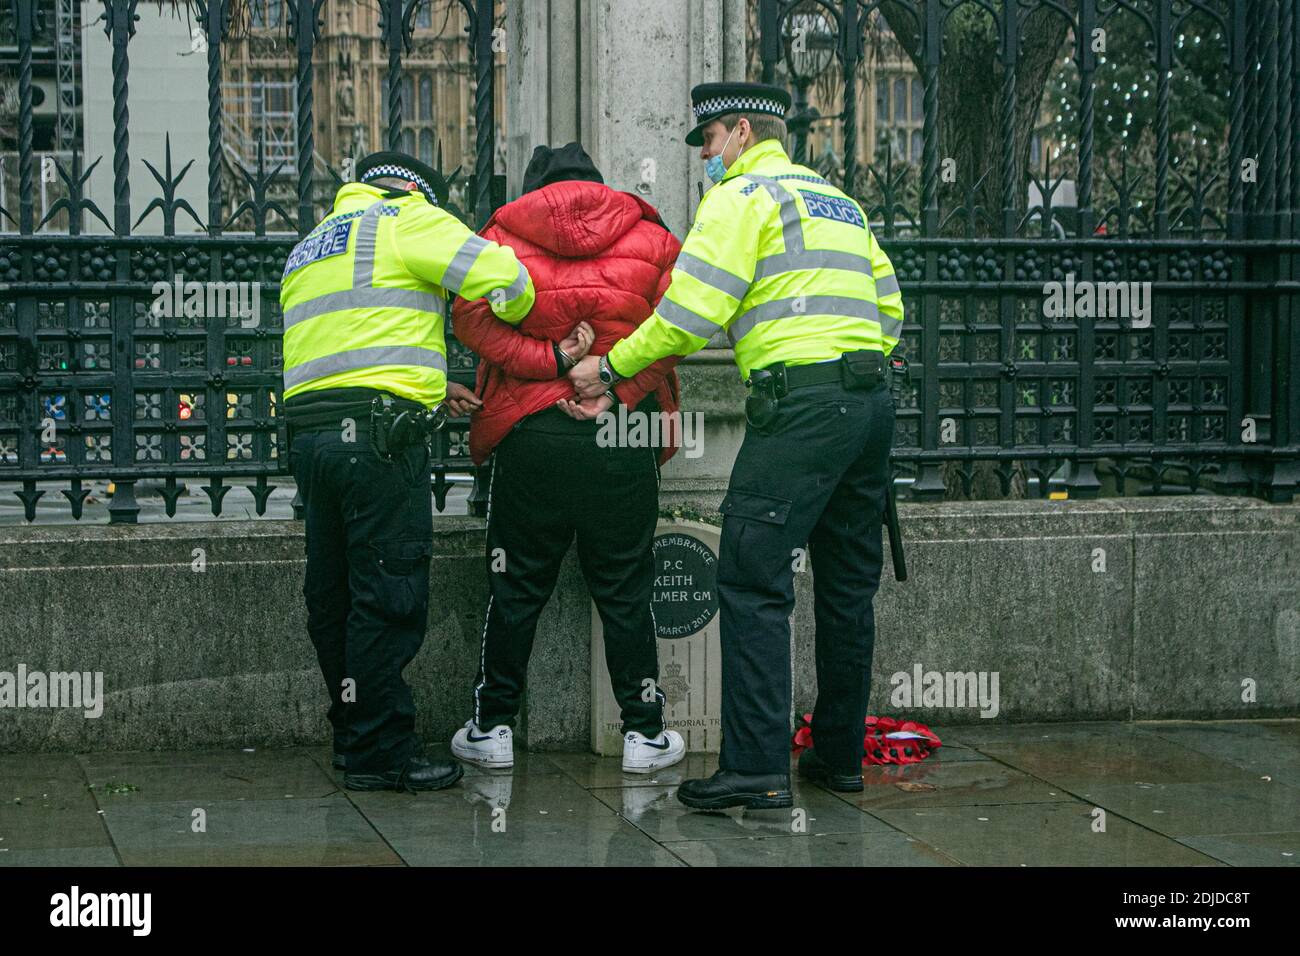 WESTMINSTER LONDON 14 December 2020. A protester is handcuffed by police  during an anti lockdown protest organised by StandUp X in Westminster.  London is to be moved to 'Tier 3' restrictions, high